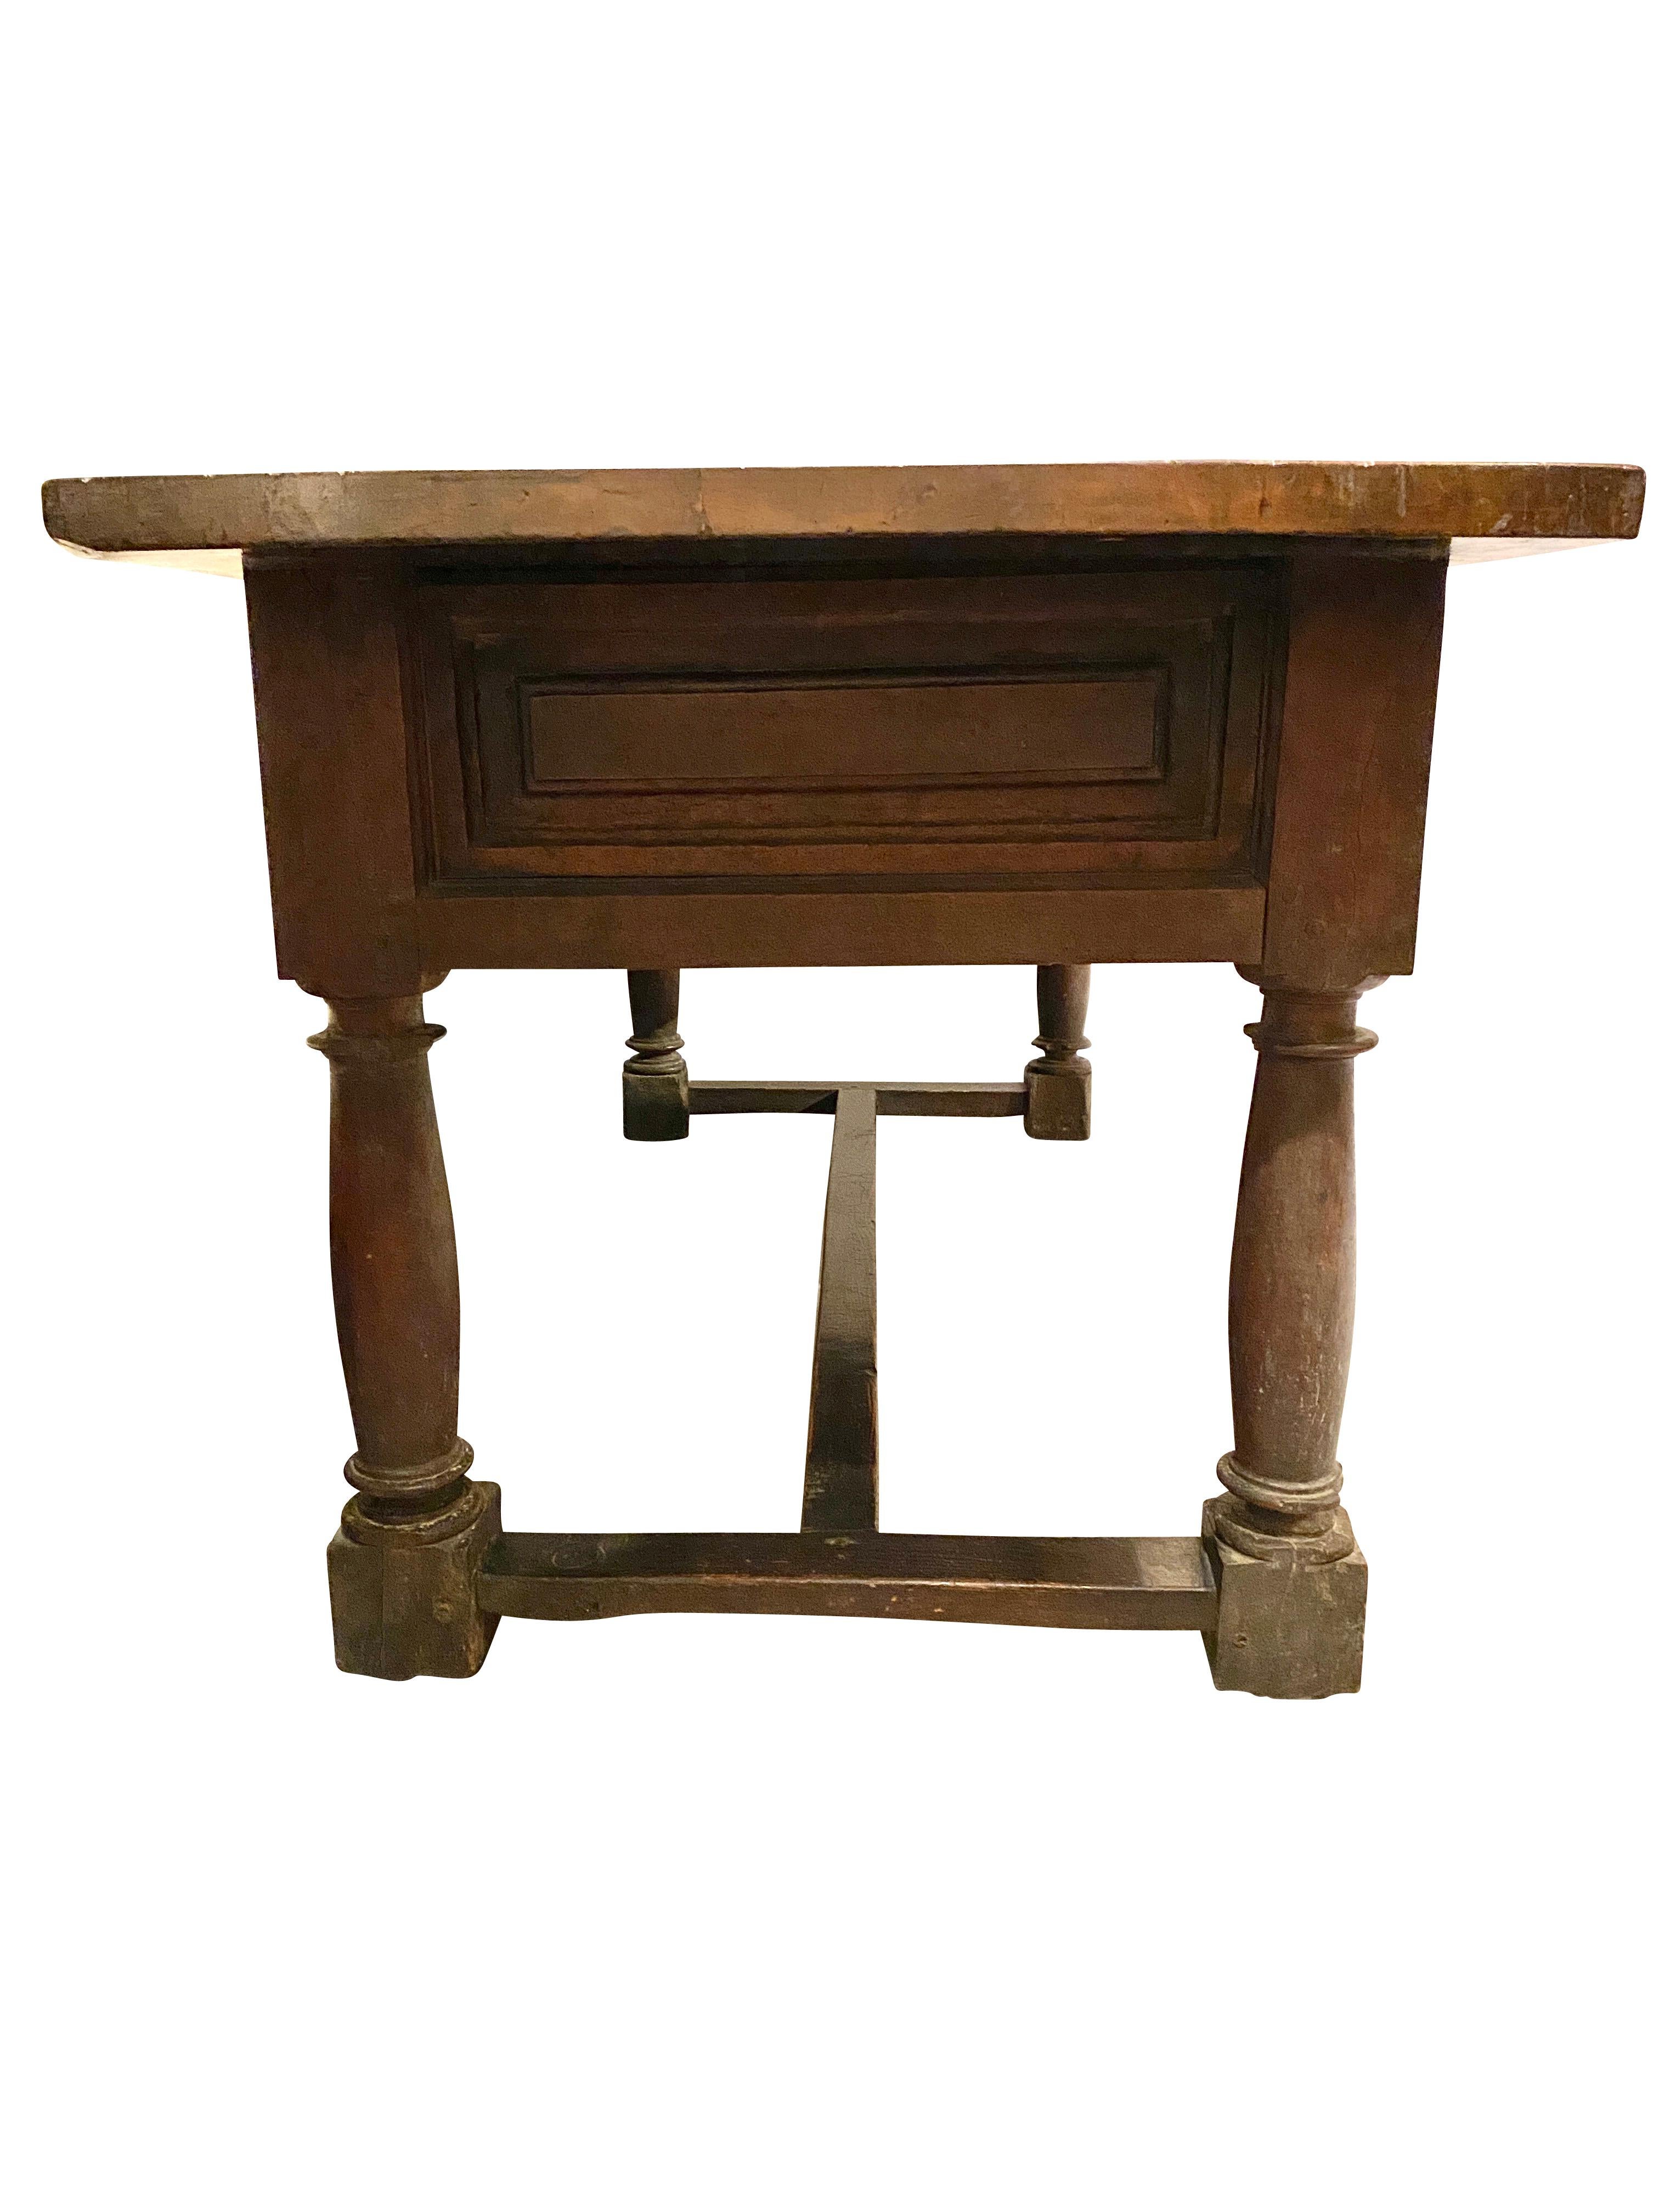 17th Century Spanish Baroque Walnut Table In Fair Condition For Sale In Essex, MA